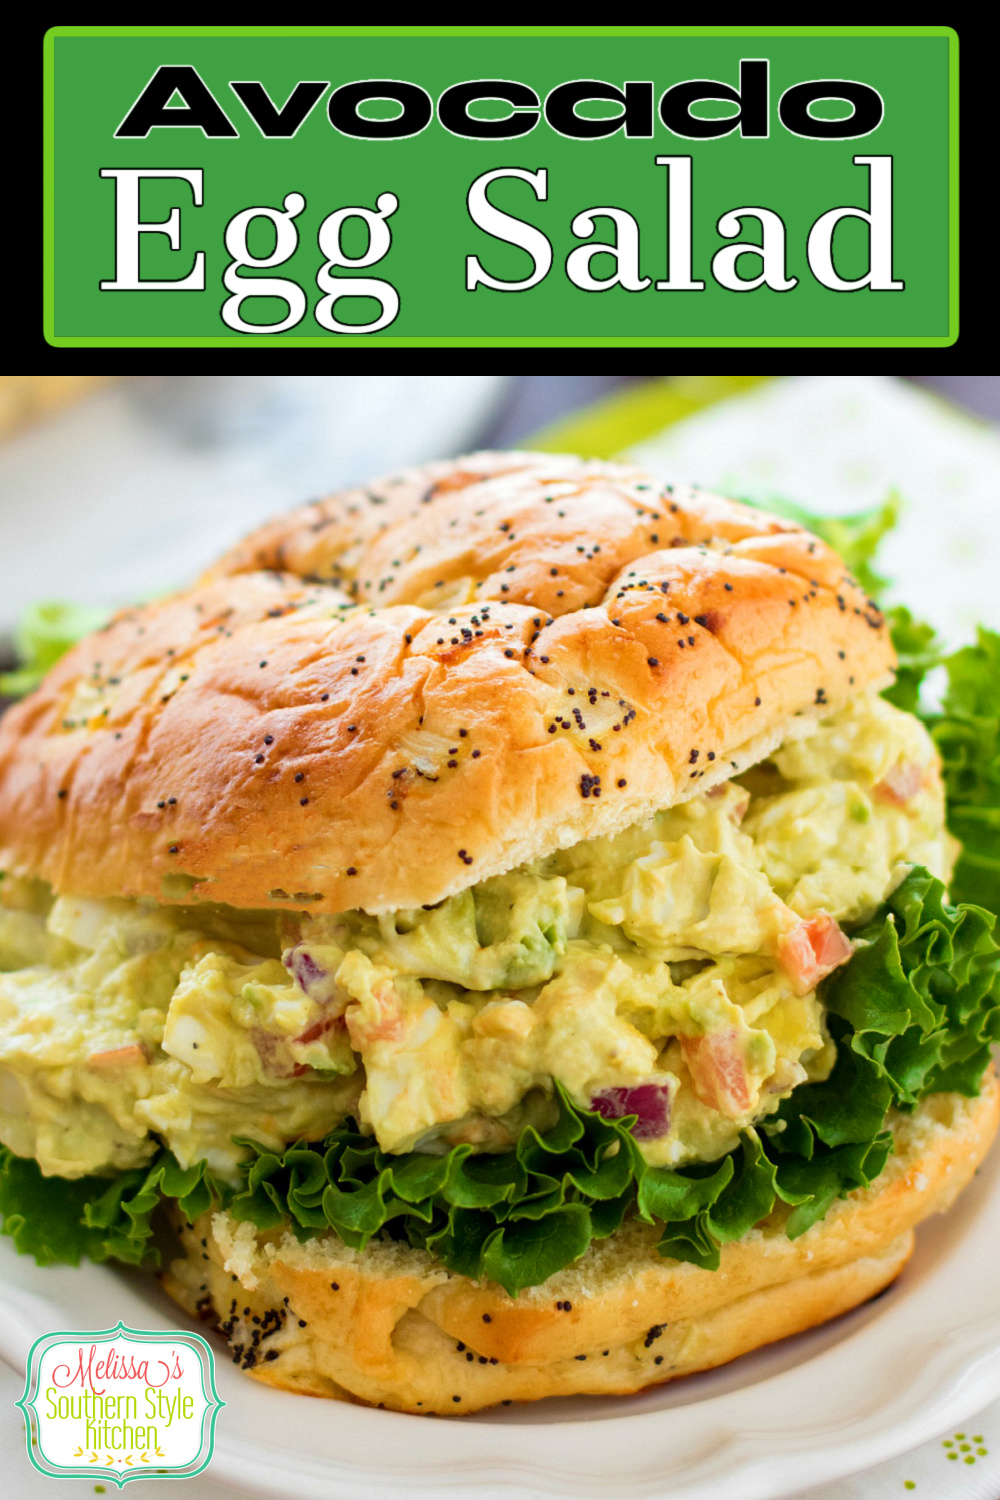 Take egg salad sandwiches t o another level with this Avocado Egg Salad #eggsalad #healthyrecipes #salad #eggs #sandwichrecipes #southernfood #avocadoeggsalad via @melissasssk